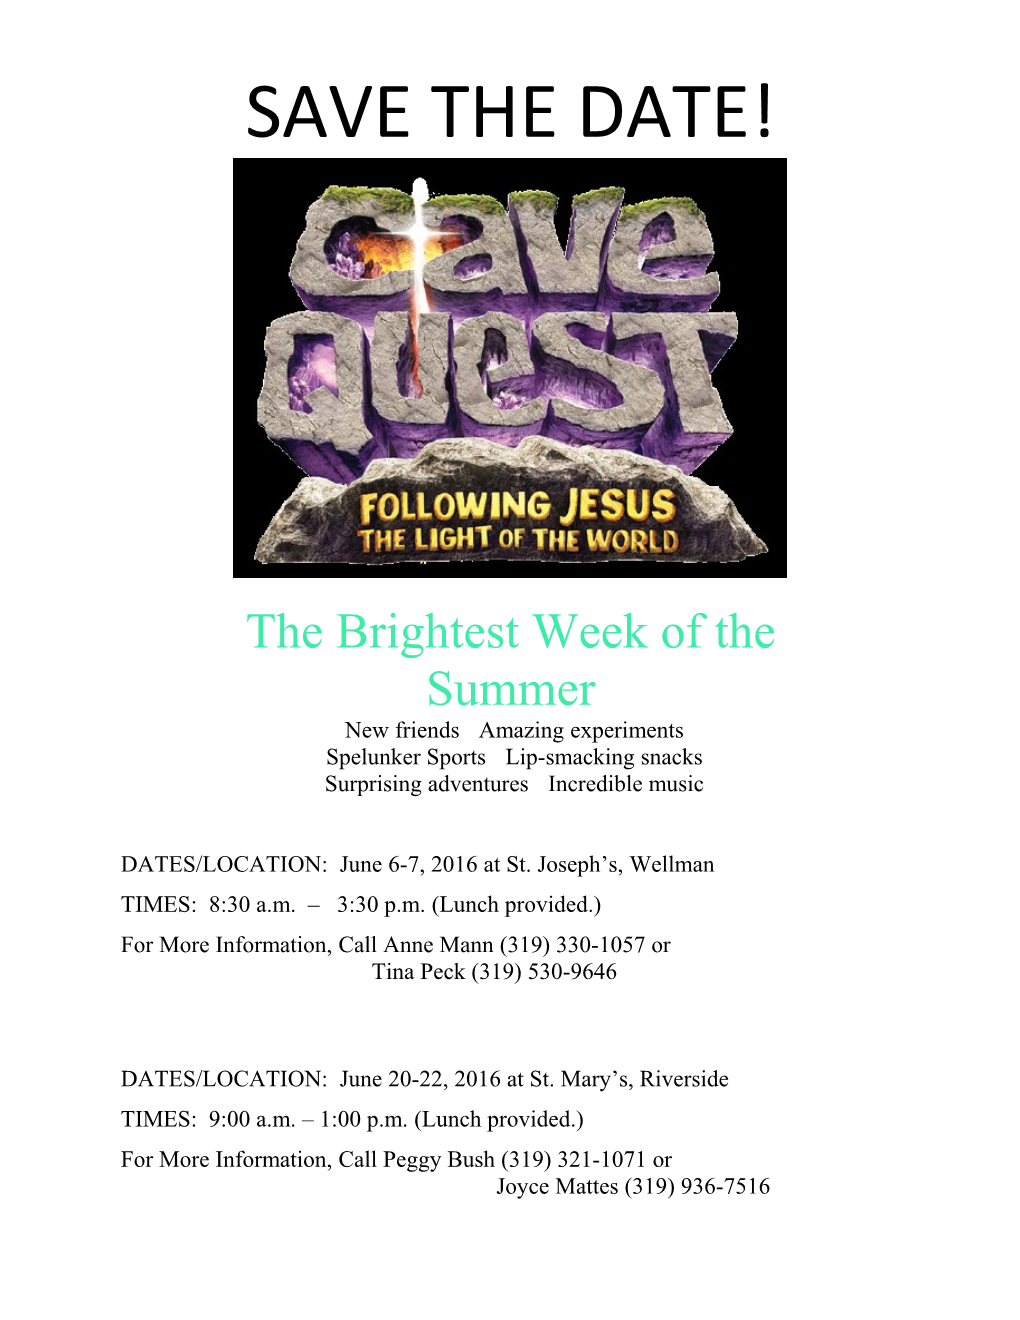 The Brightest Week of The